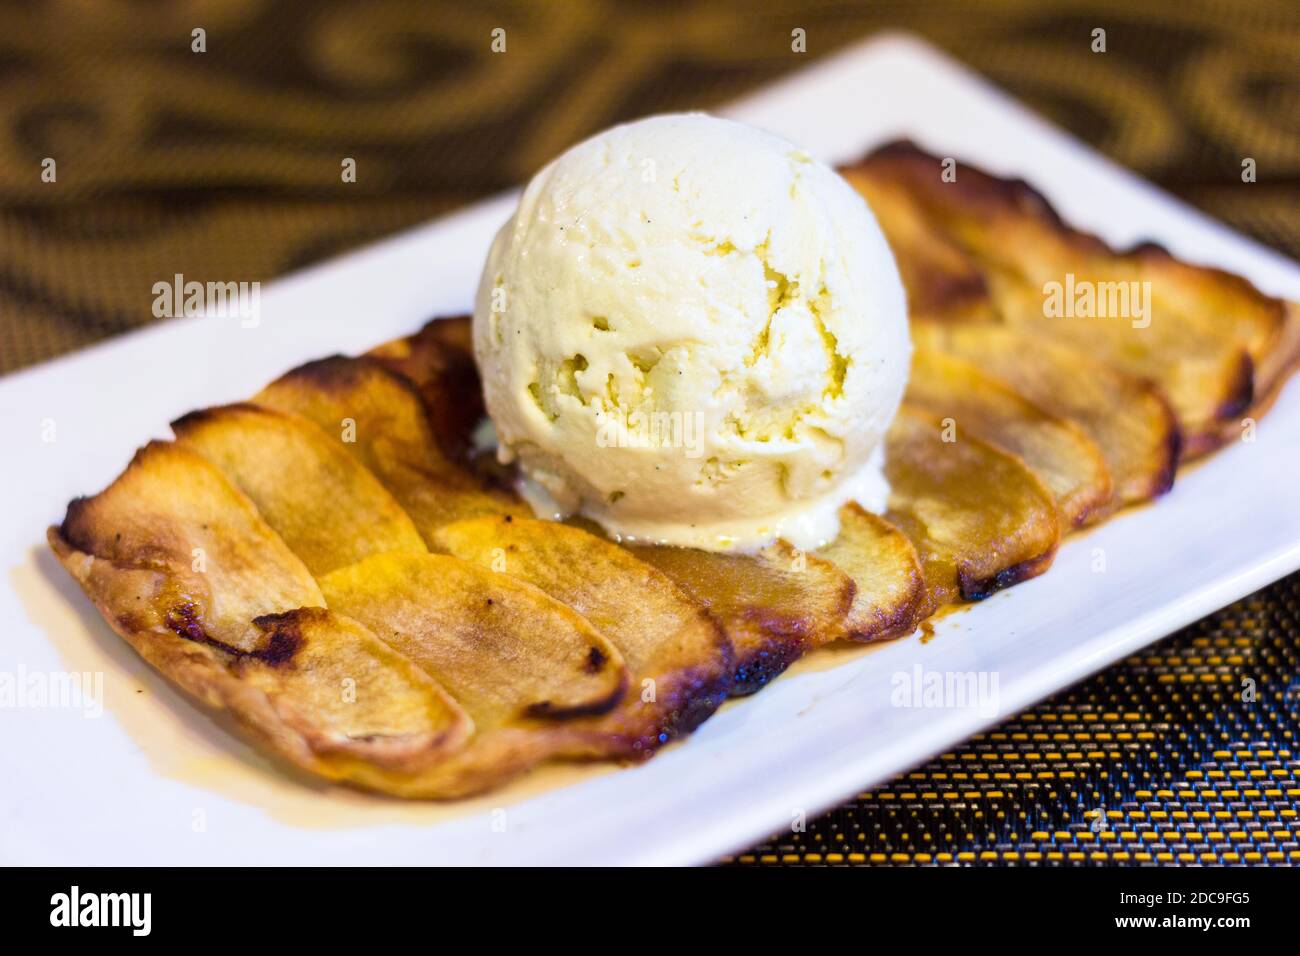 French apple pie ala mode at a cafe in Davao City, Philippines Stock Photo